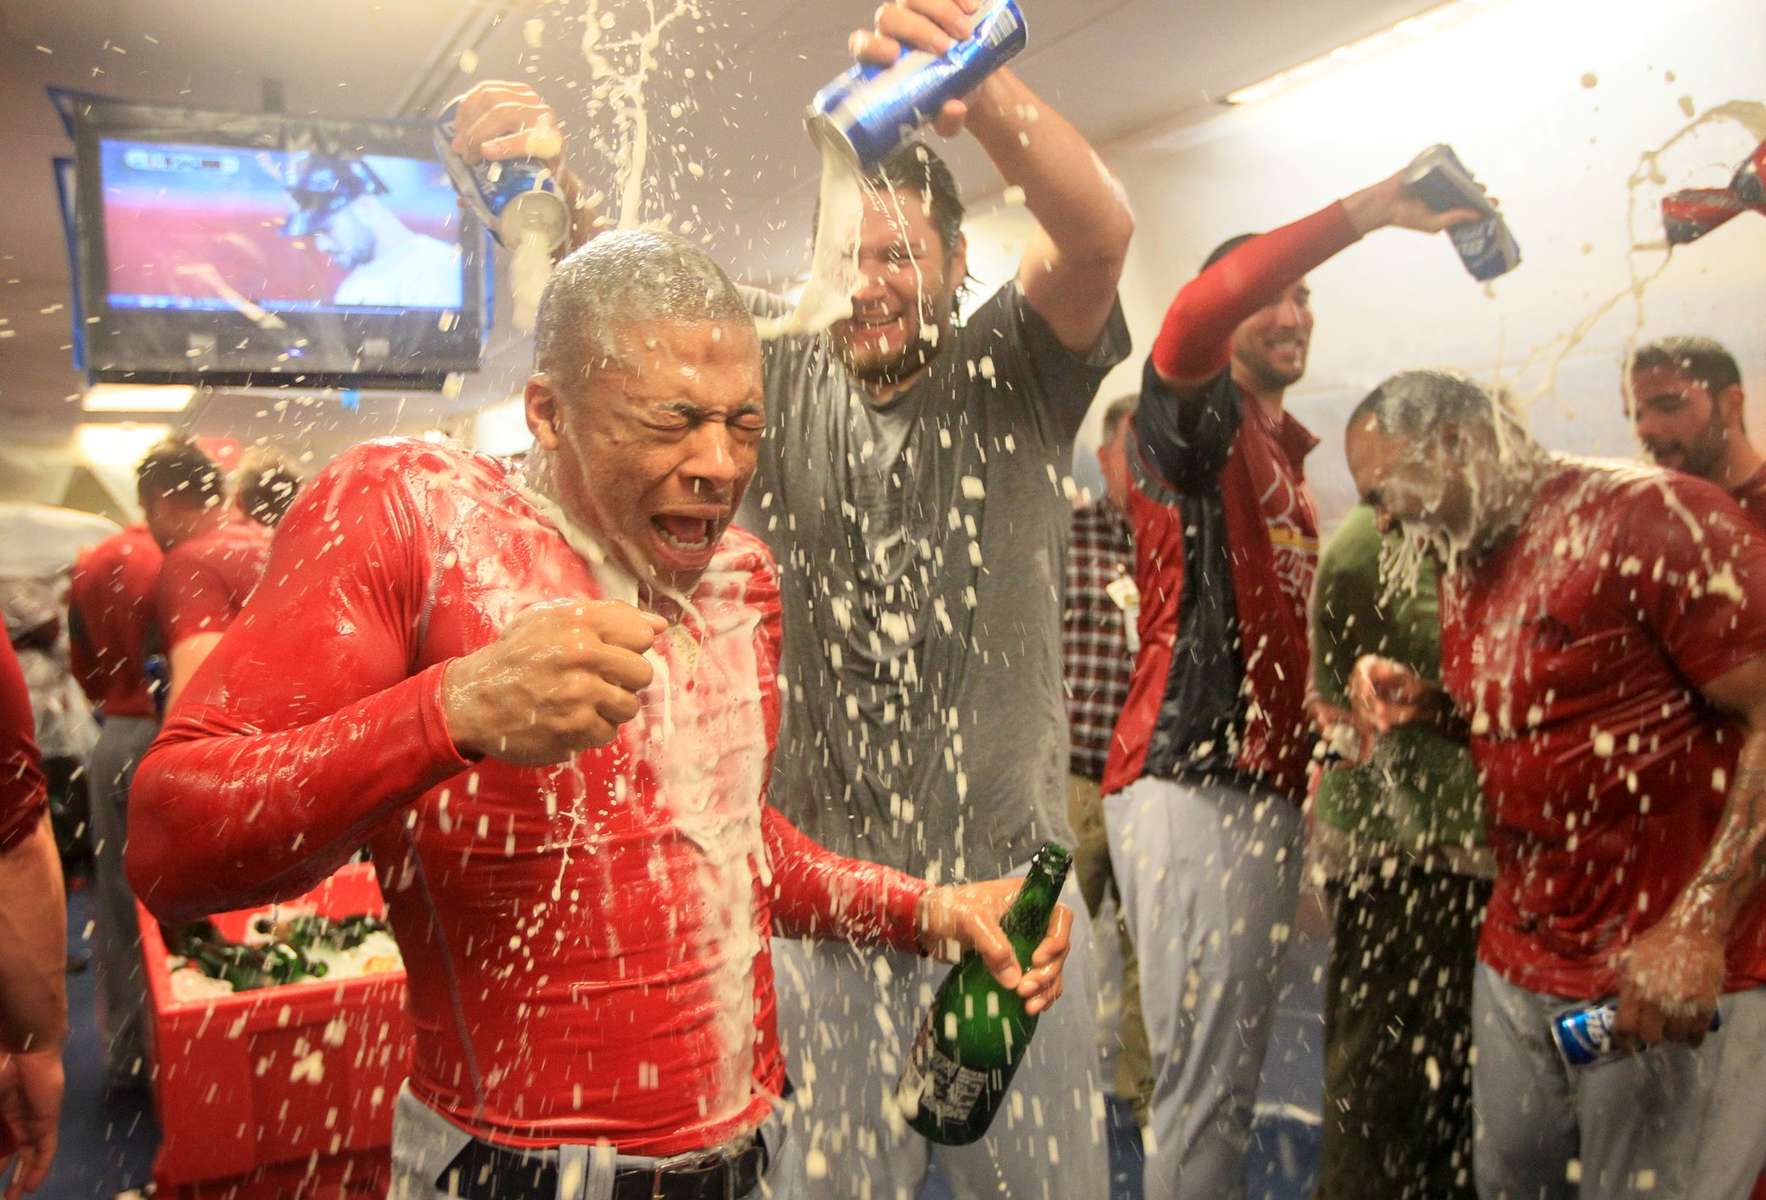 Adron Chambers, left, is doused with beer by pitcher Lance Lynn, center, in the locker room after the Cardinals won game five of the NLDS between the St. Louis Cardinals and Philadelphia Phillies at Citizens Bank Park on Friday, October 7, 2011 in Philadelphia.Photo by David Carson, dcarson@post-dispatch.com